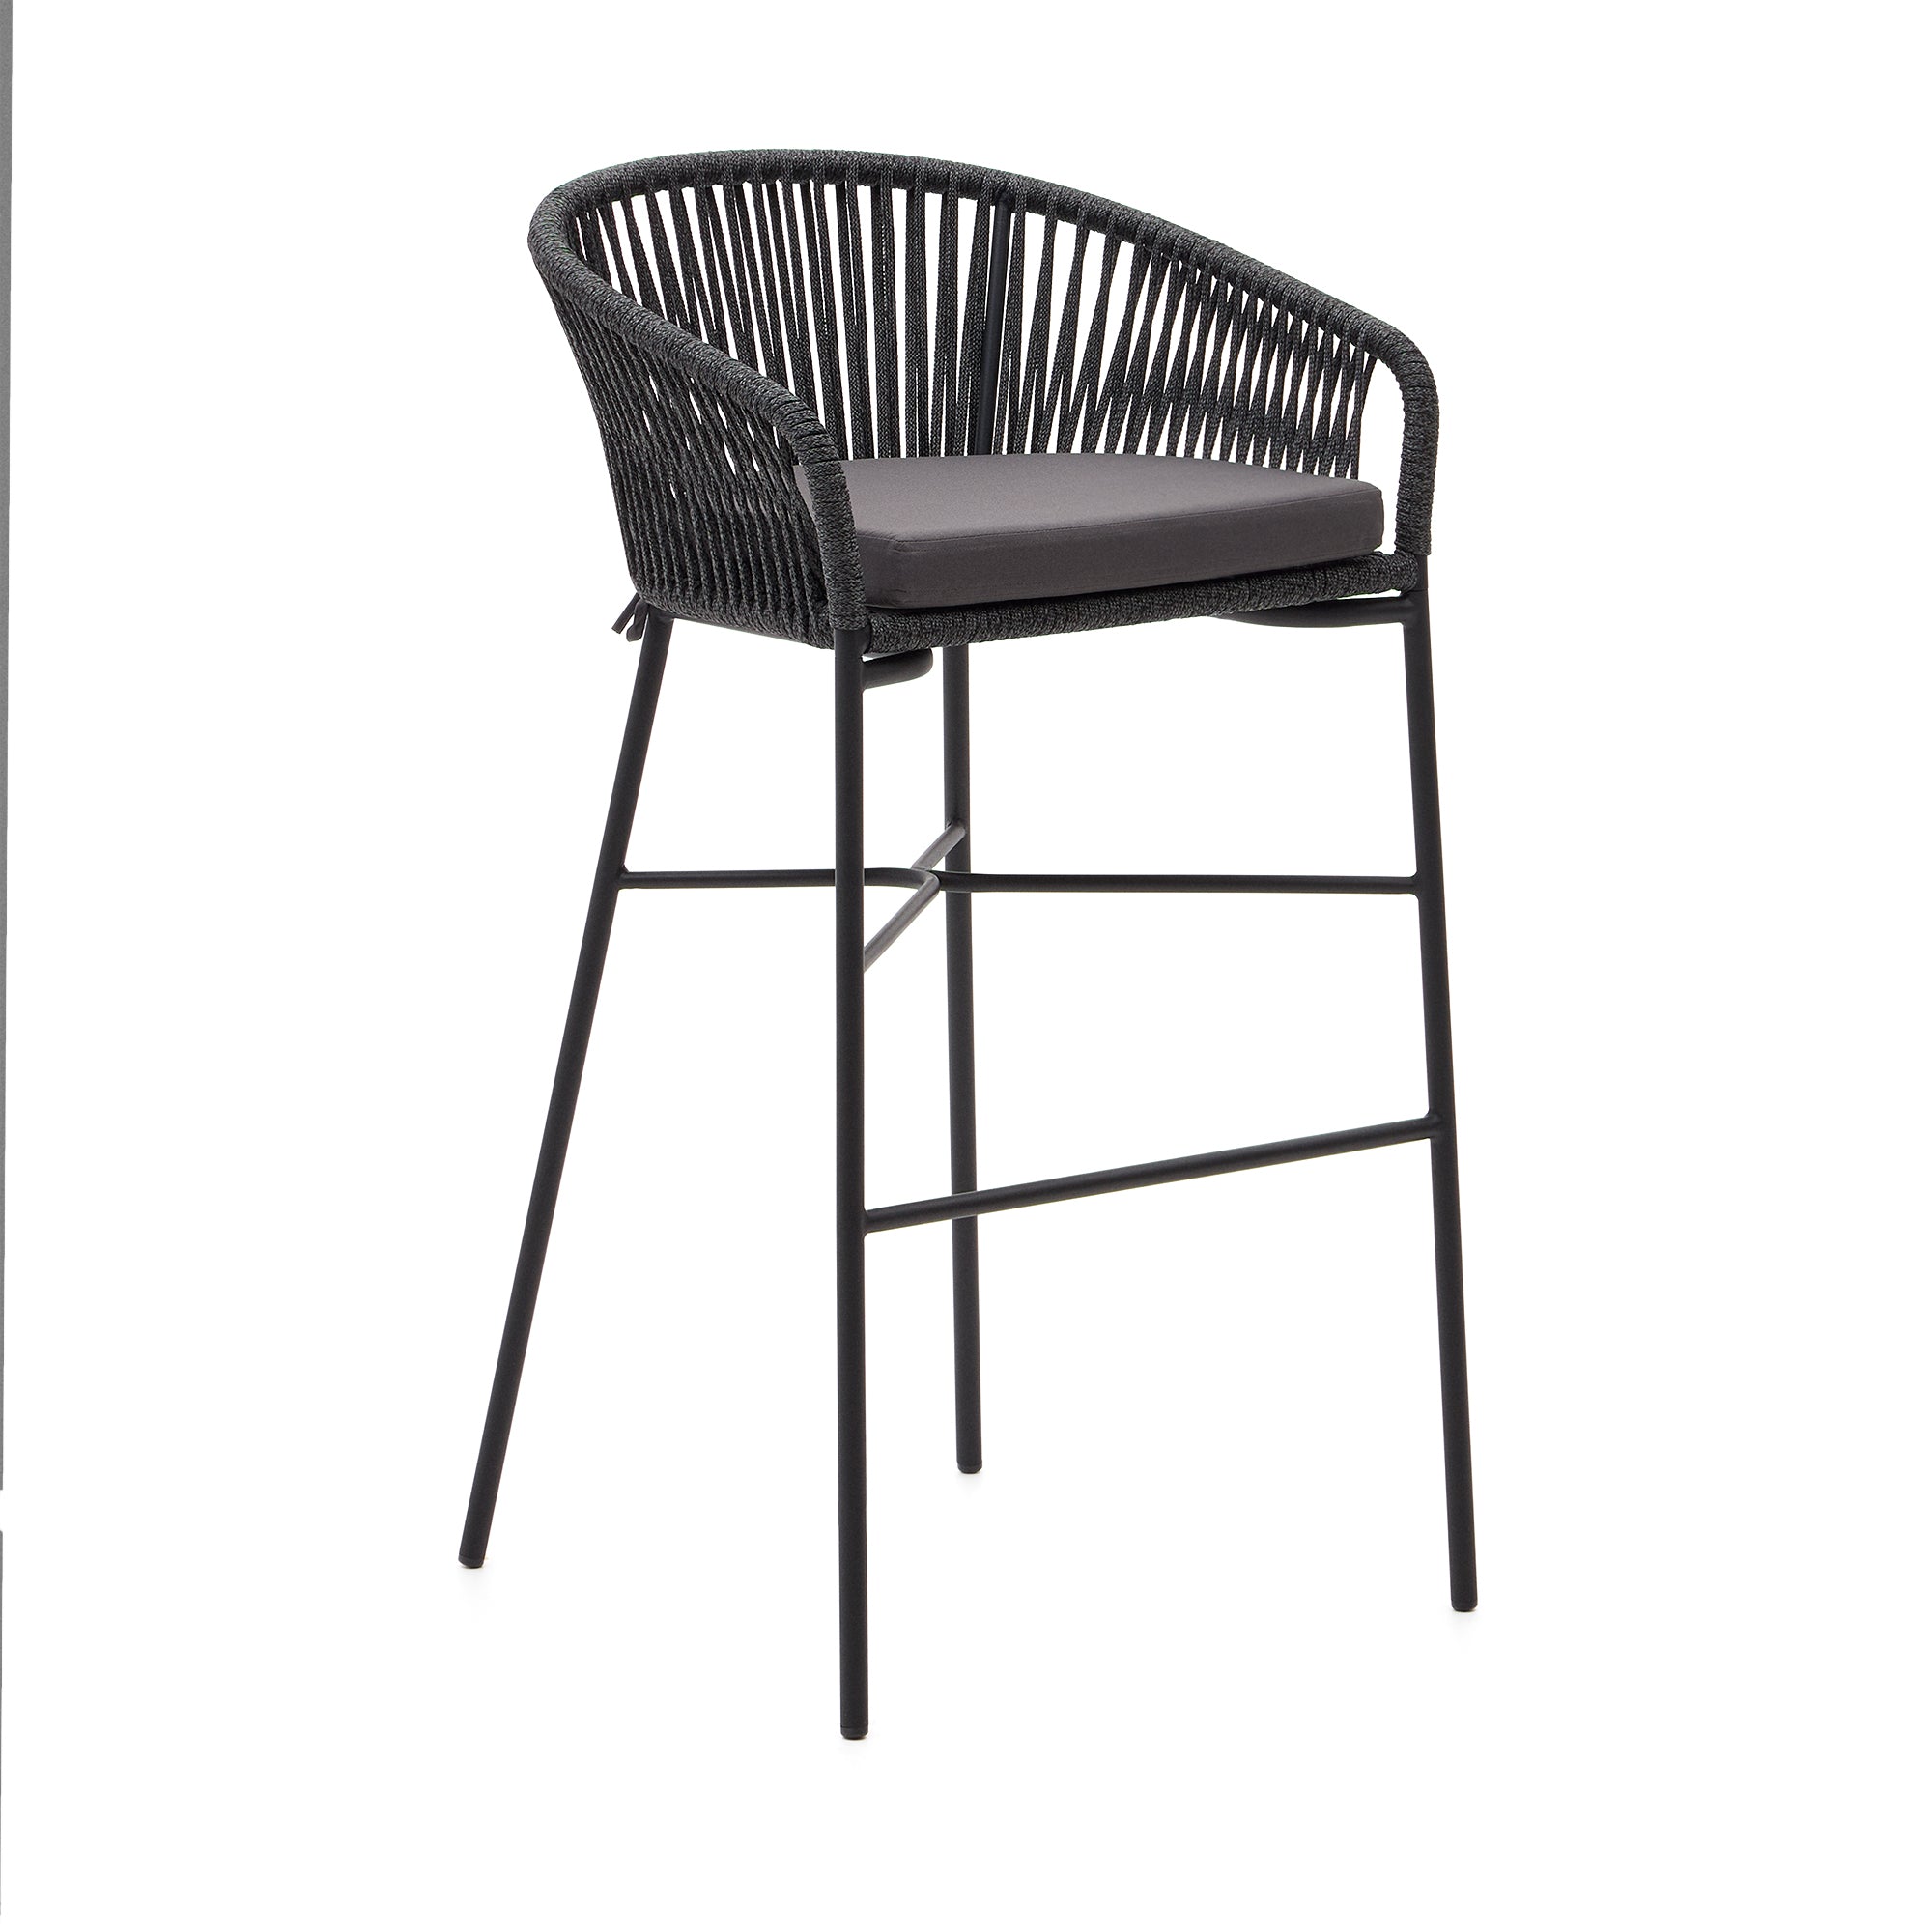 Yanet stackable stool made from black cord and galvanised steel, height 80 cm